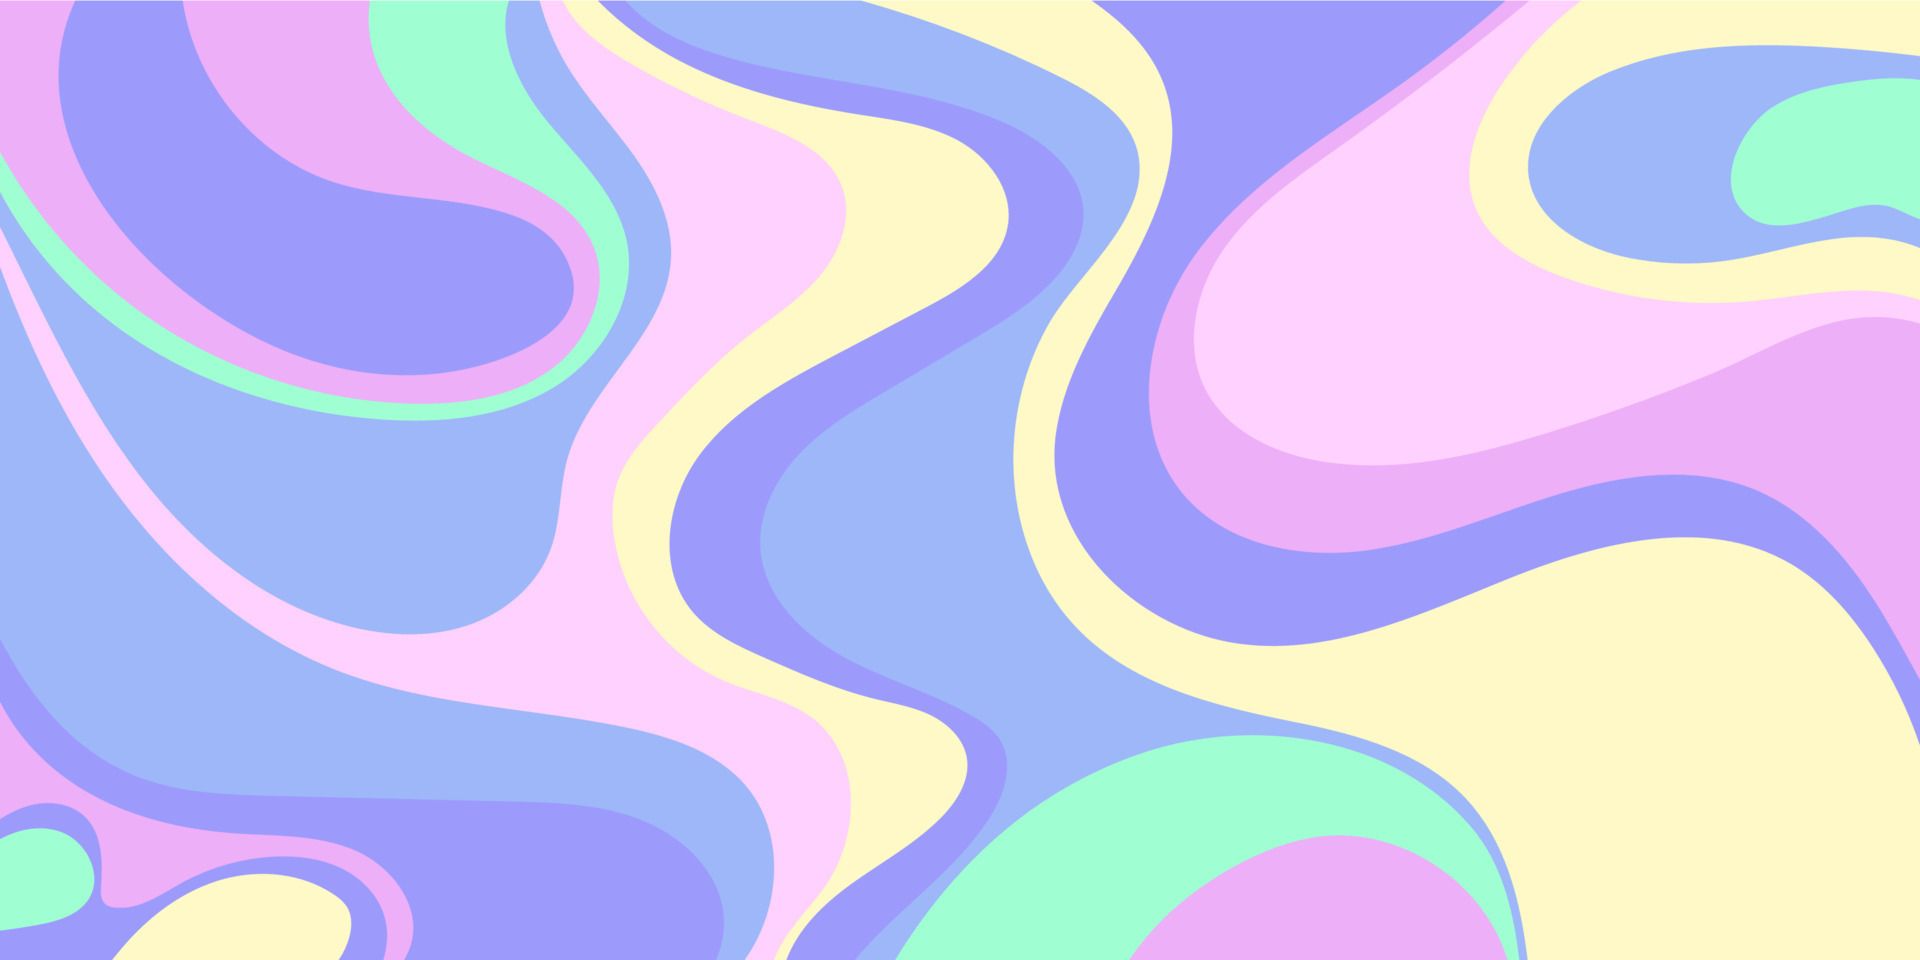 Psychedelic y2k background 2000. Vector illustration in retro aesthetic 1990 style